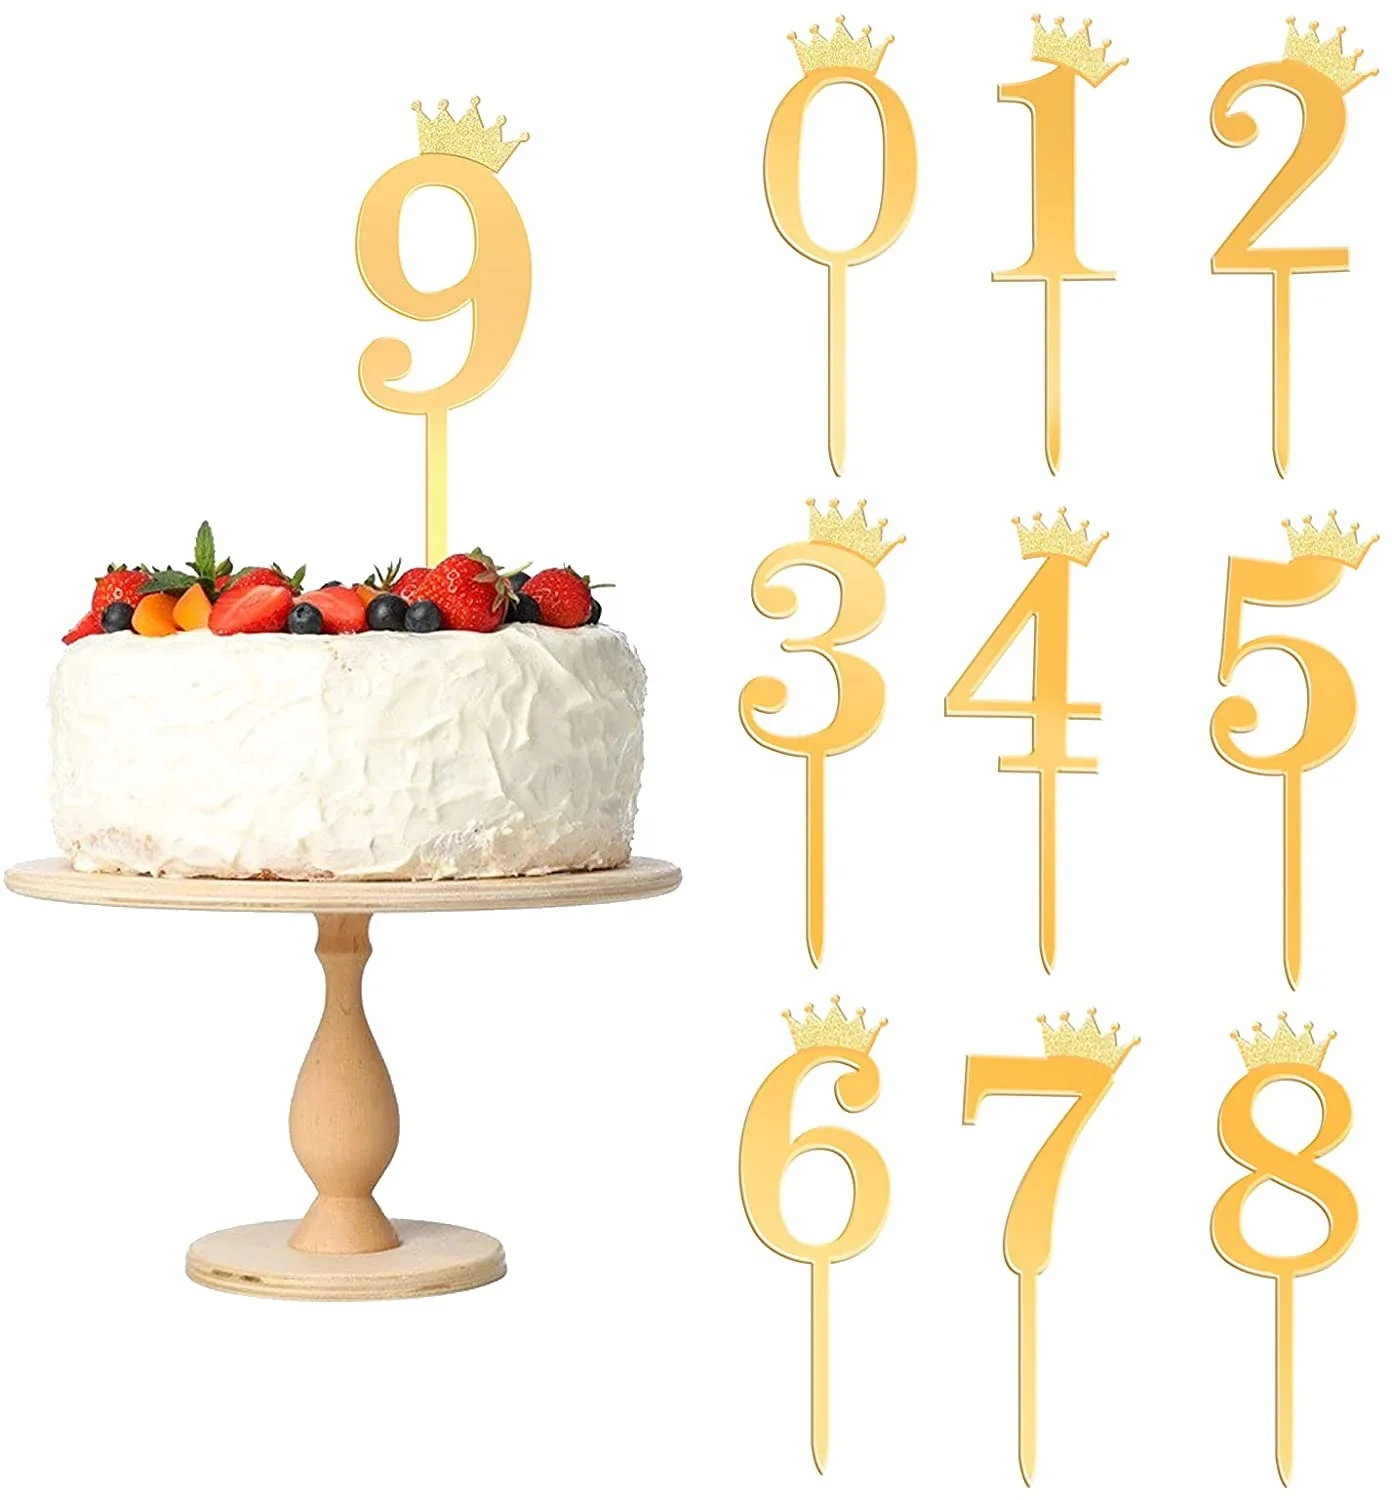 0-9 Number Candle Cake Toppers Glitter Birthday Party Cake Baking Decoration 